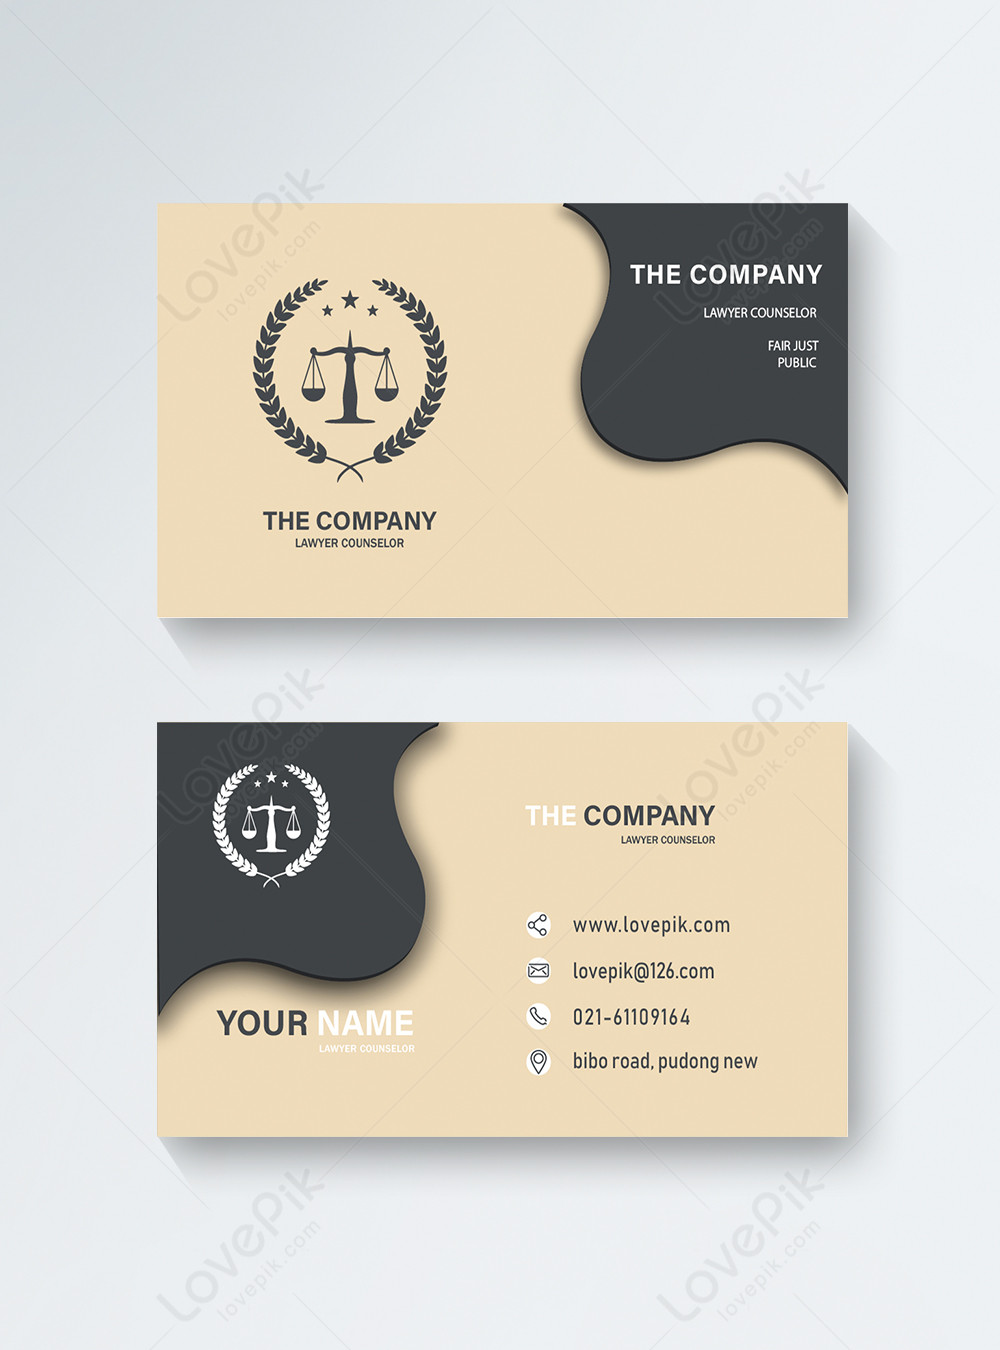 Lawyer business card template image_picture free download Within Legal Business Cards Templates Free